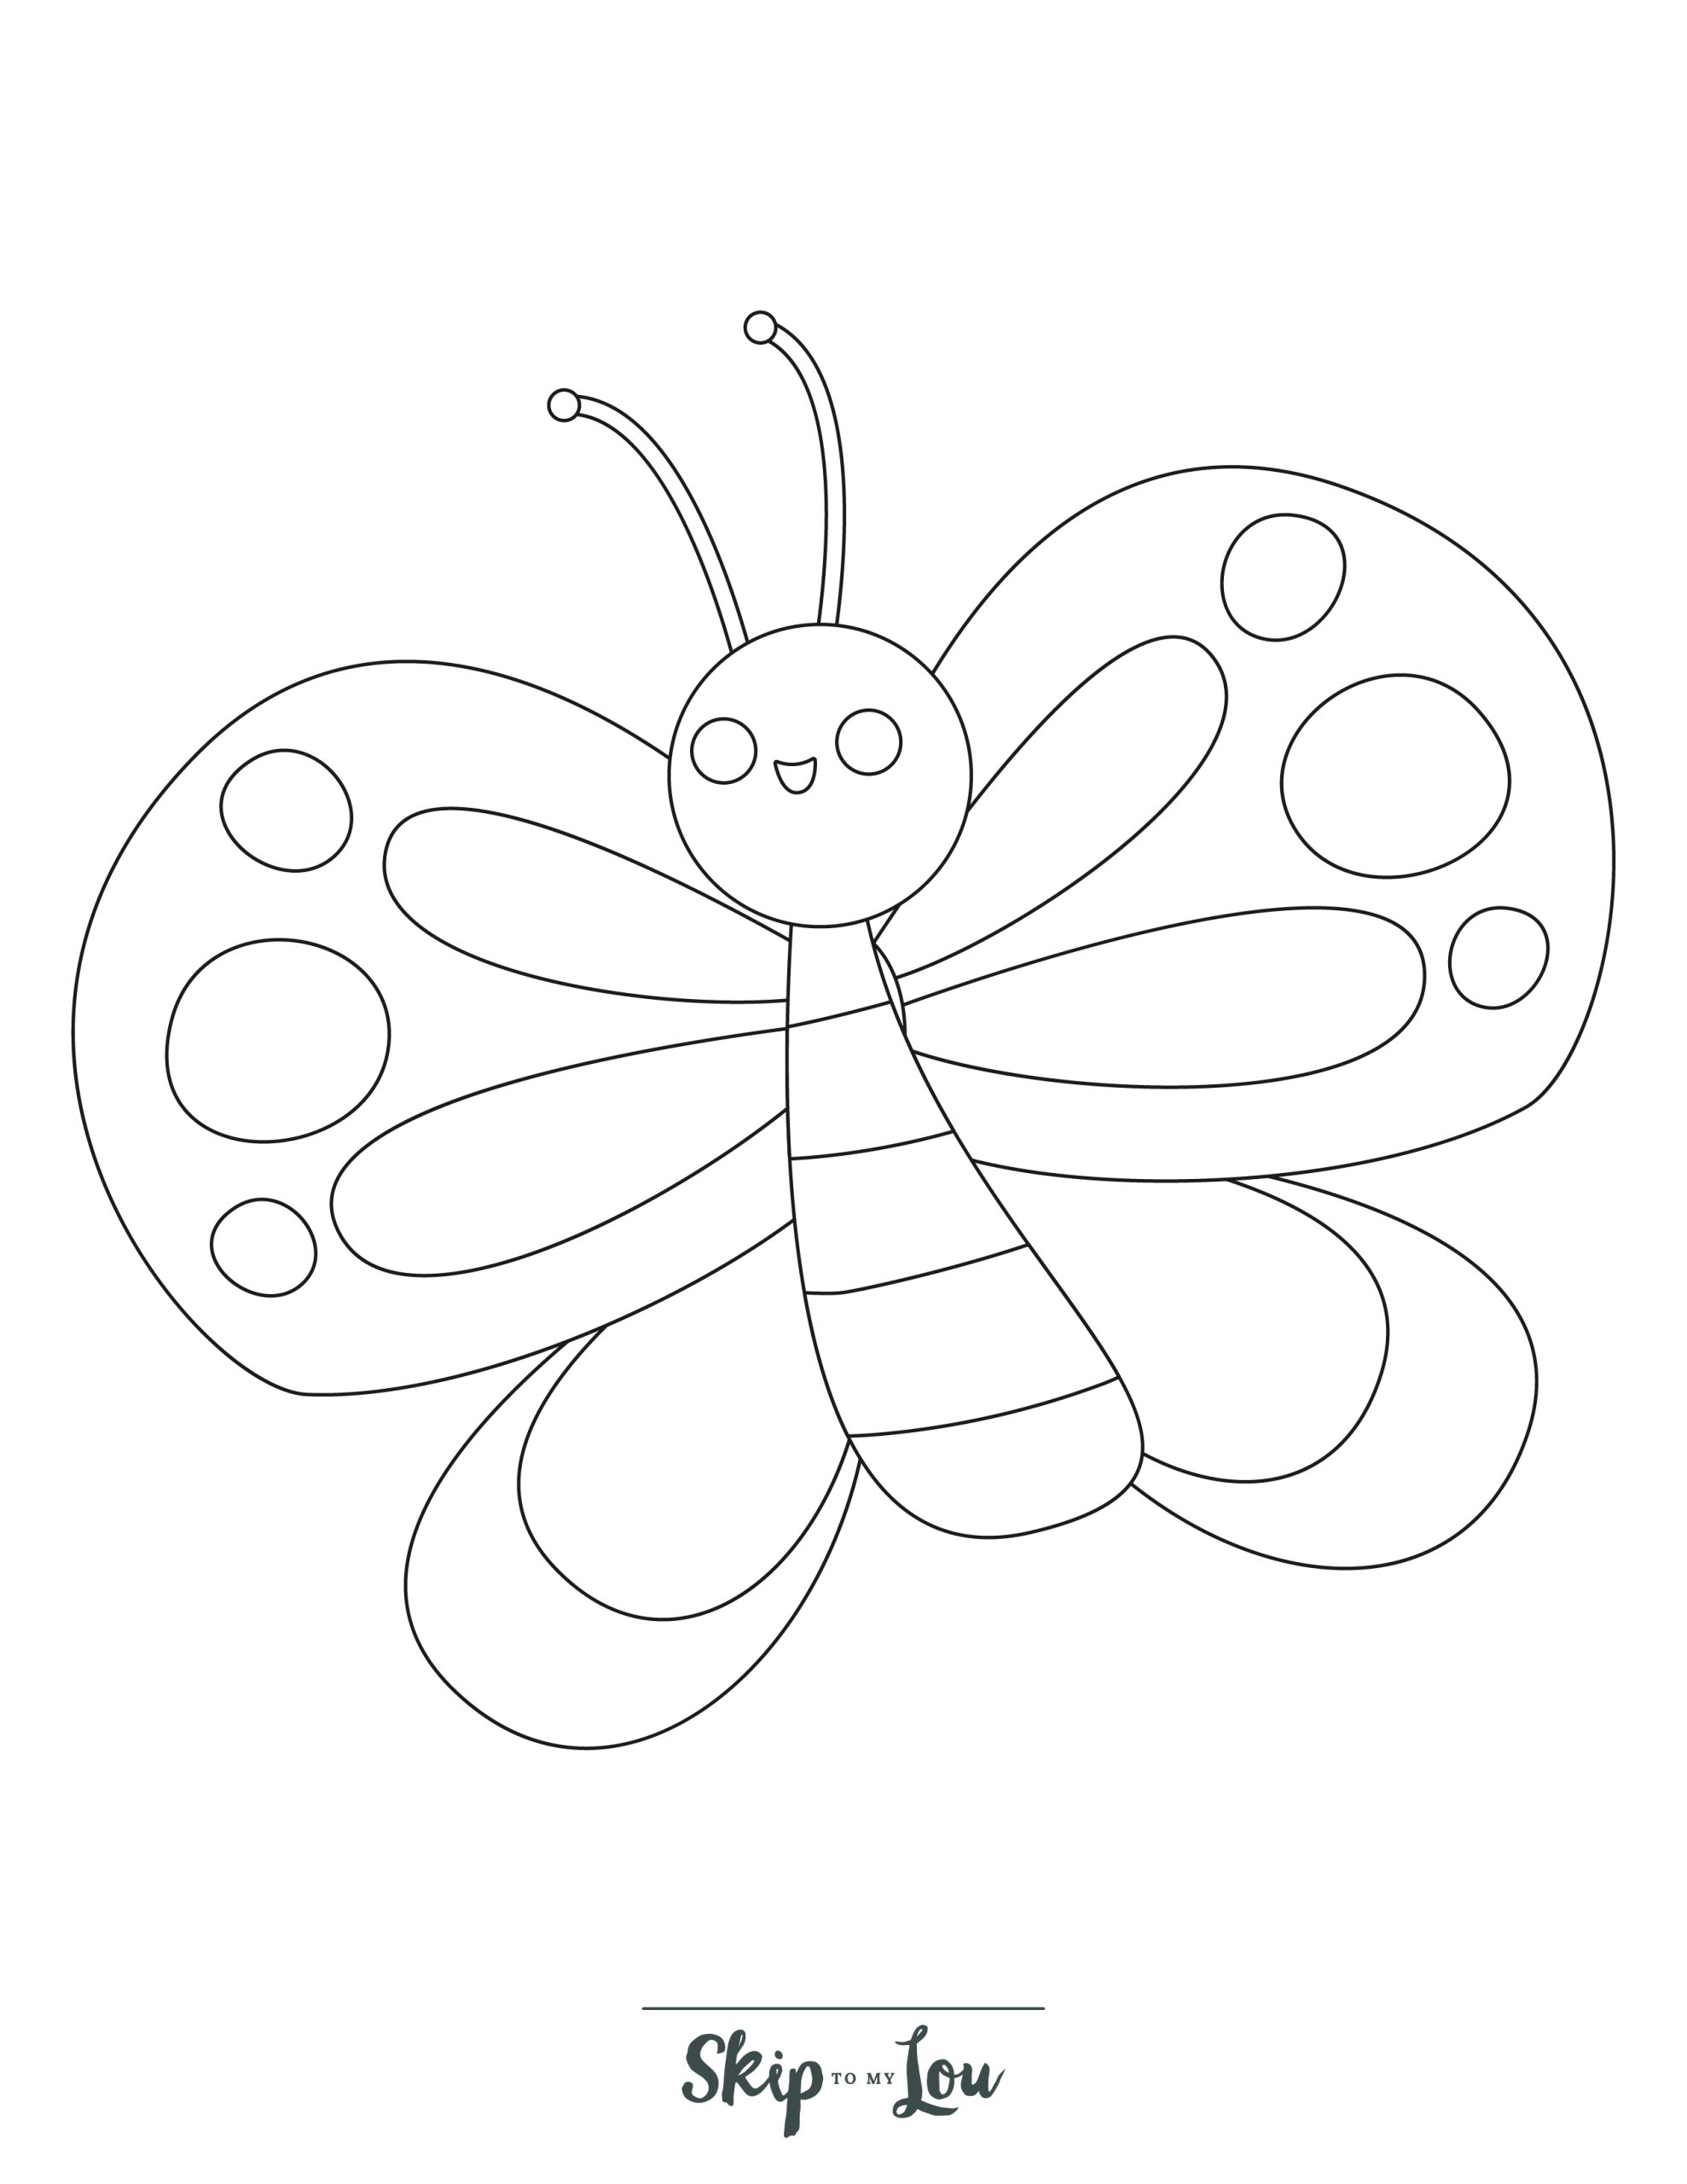 Preschool Coloring Page 9 - Simple line drawing of a butterfly 